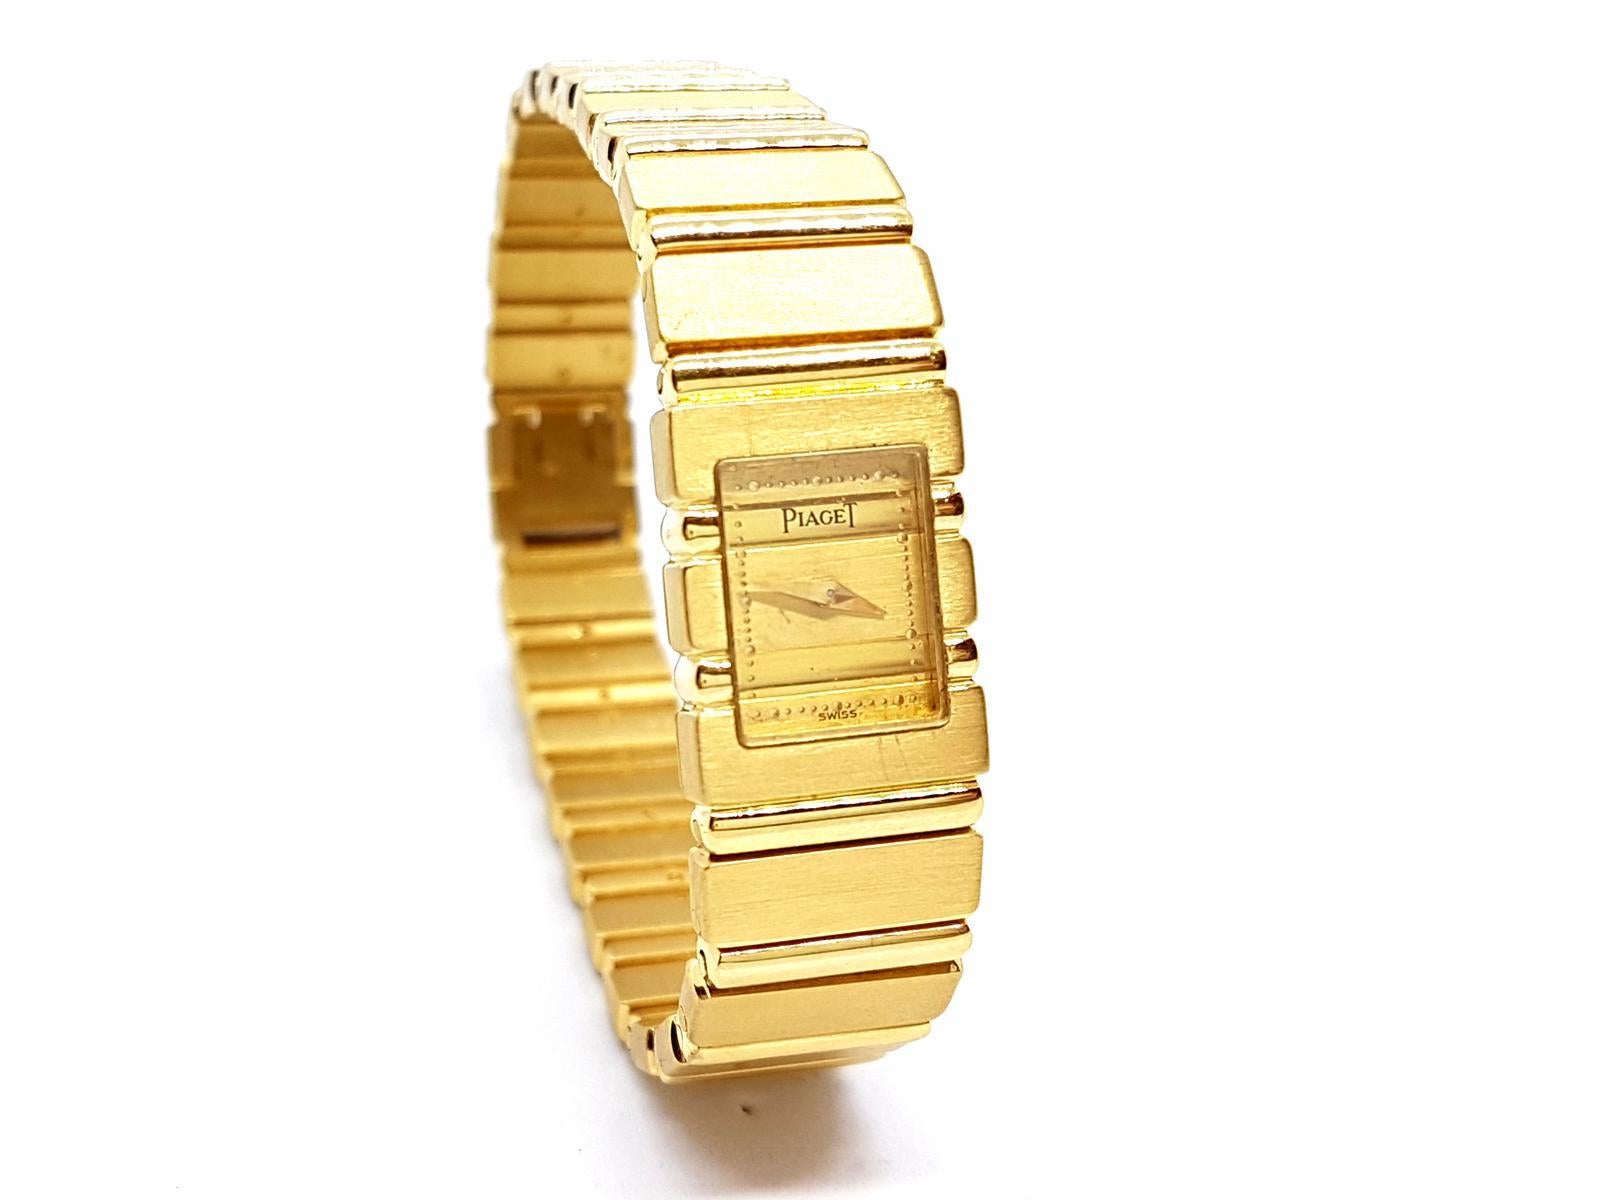 Watch signed by Piaget. Polo model. quartz movement. 1980-90. numbered 15201 443752 C701. Case 2 cm. bracelet size 18 cm. width strap: 1cm recently revised perfect working. yellow gold 750 thousandths (18K) stamped .
Total weight: 82.90 g
